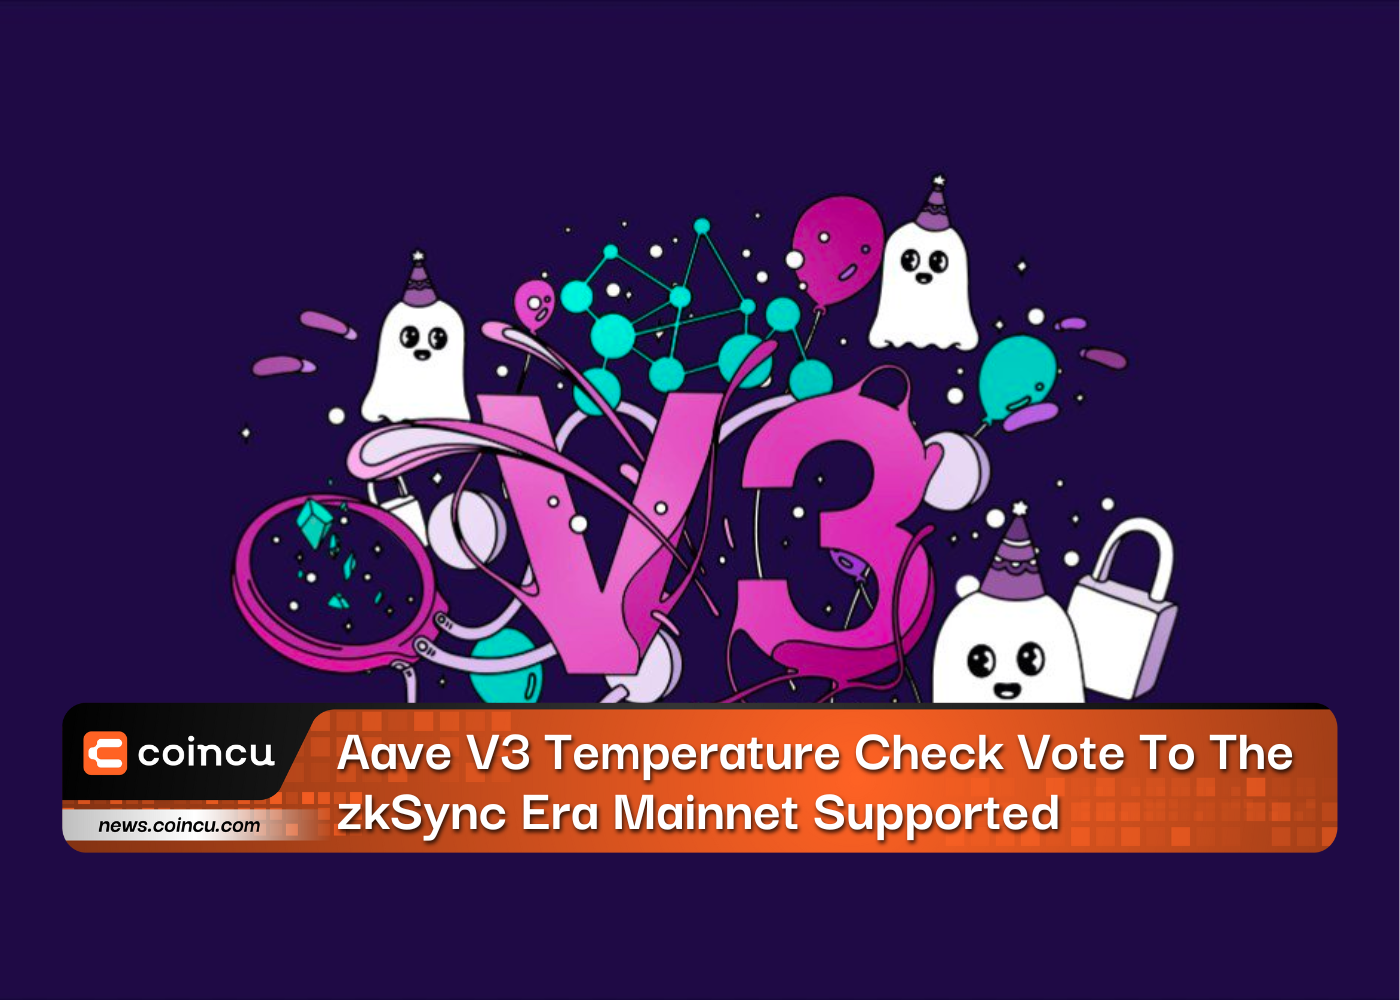 Aave V3 Temperature Check Vote To The zkSync Era Mainnet Supported